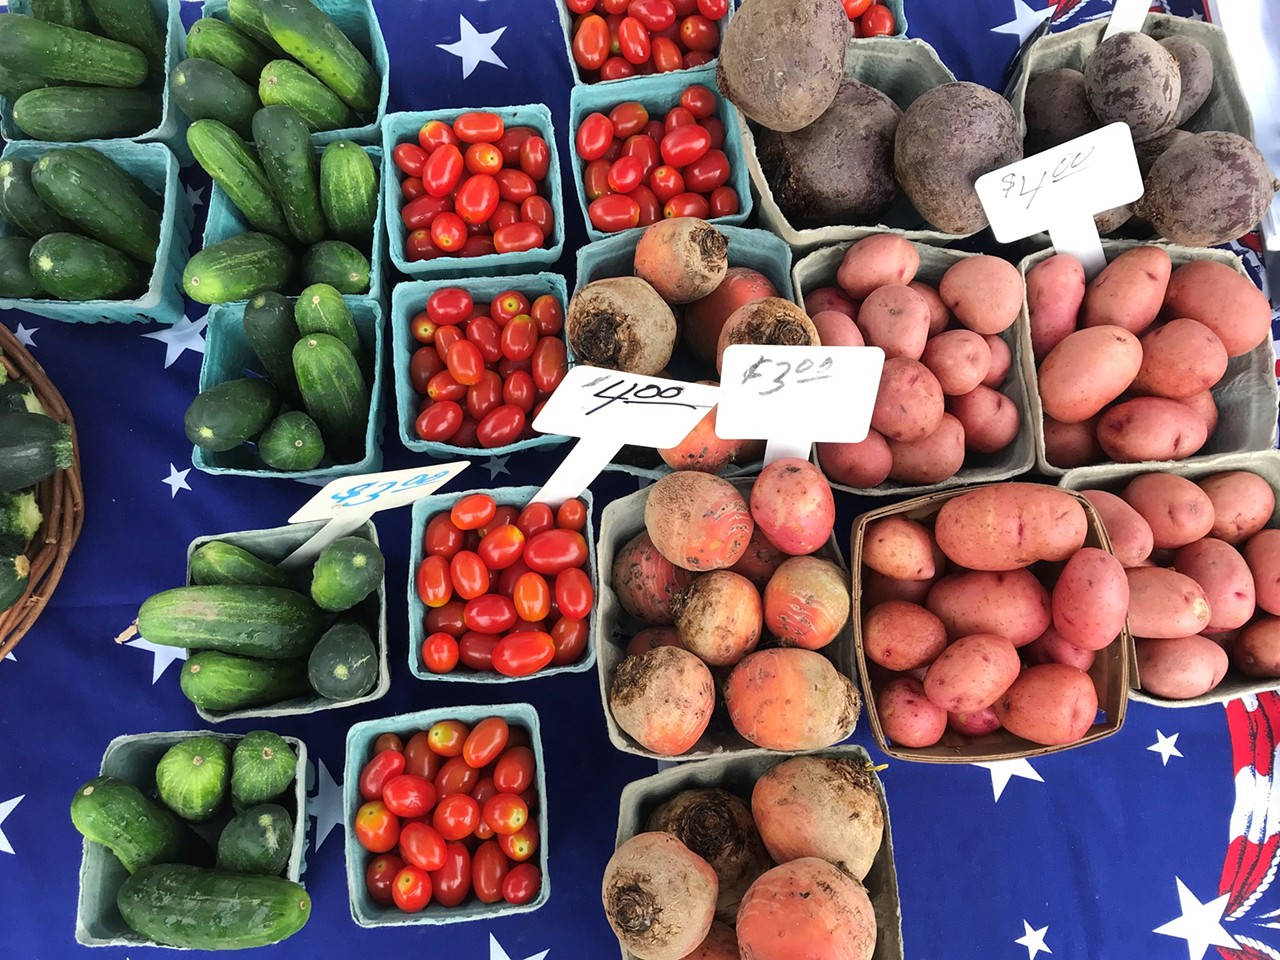 Independence Farmers Market
2001 Jackwoods Parkway., Independence
Saturdays 8:30 a.m.-1 p.m.
This market offers many different locally sourced items like honey, greens, organic cheese, pork chops, jams and jellies through October. Grass-fed beef is also available upon request.